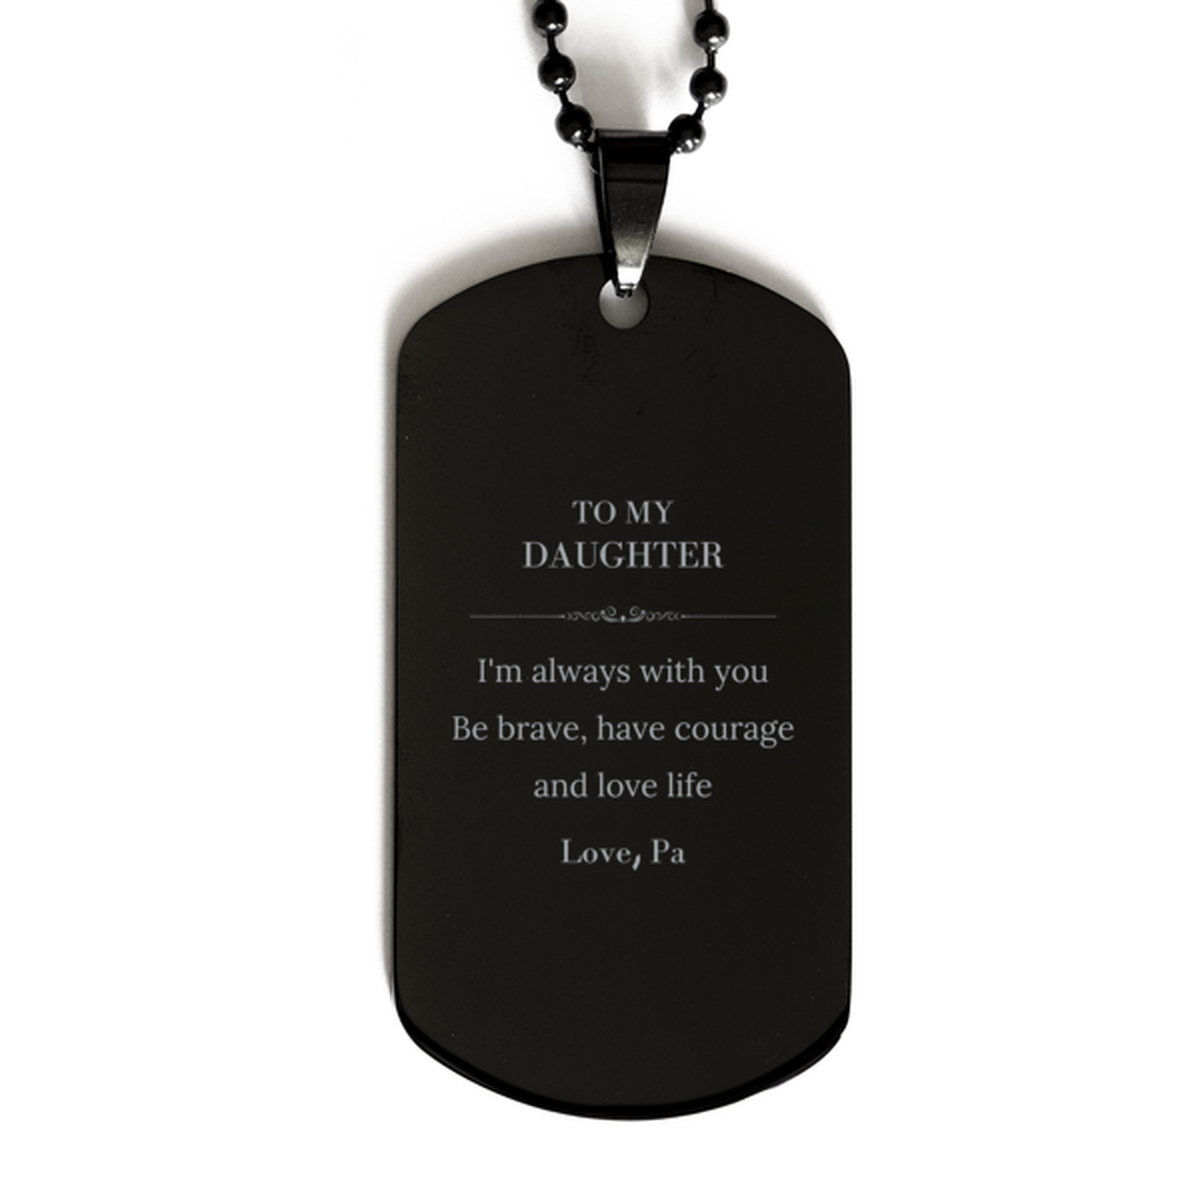 To My Daughter Gifts from Pa, Unique Black Dog Tag Inspirational Christmas Birthday Graduation Gifts for Daughter I'm always with you. Be brave, have courage and love life. Love, Pa